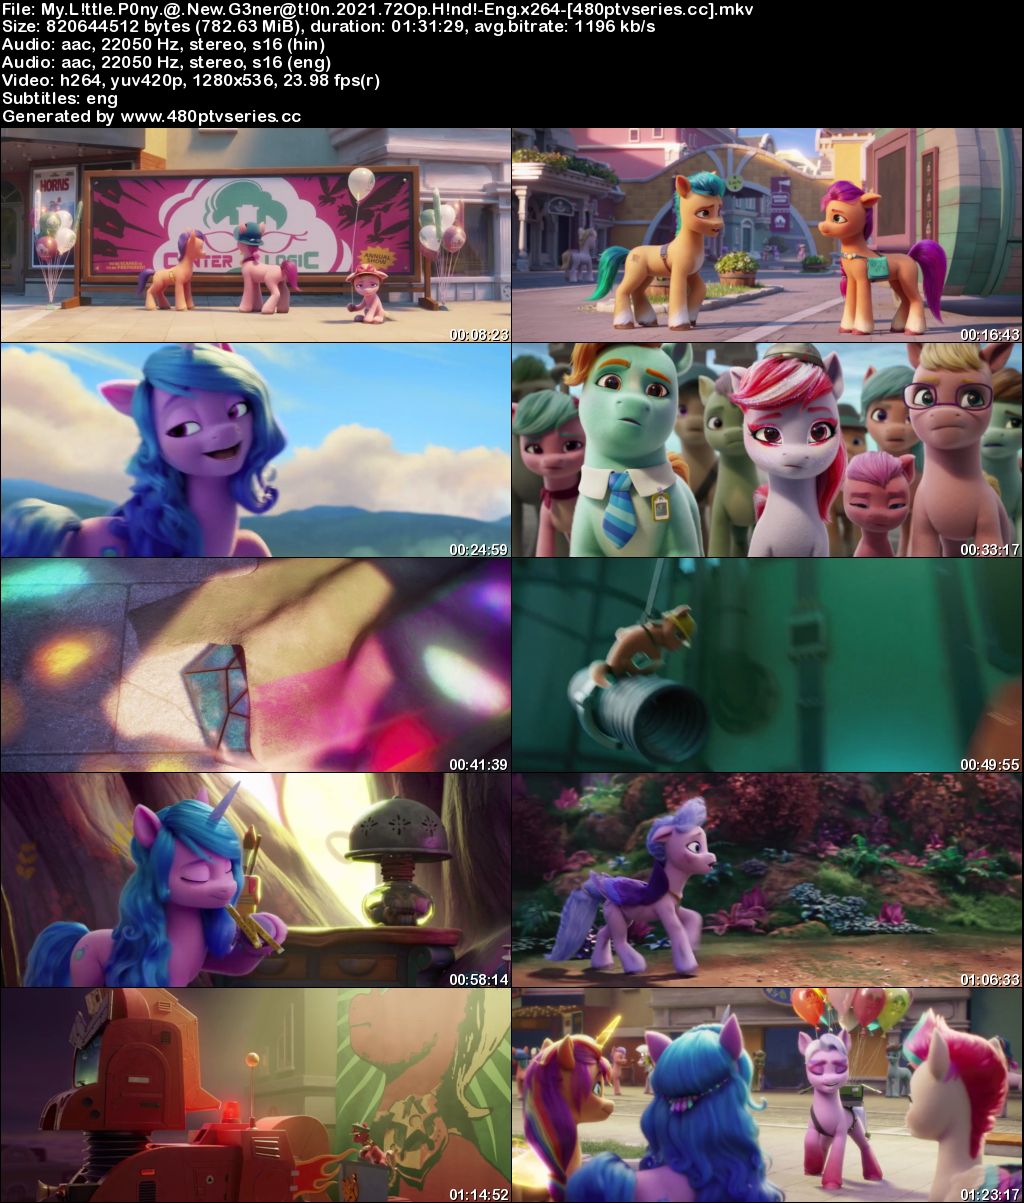 Download My Little Pony: A New Generation (2021) 750MB Full Hindi Dual Audio Movie Download 720p Web-DL Free Watch Online Full Movie Download Worldfree4u 9xmovies